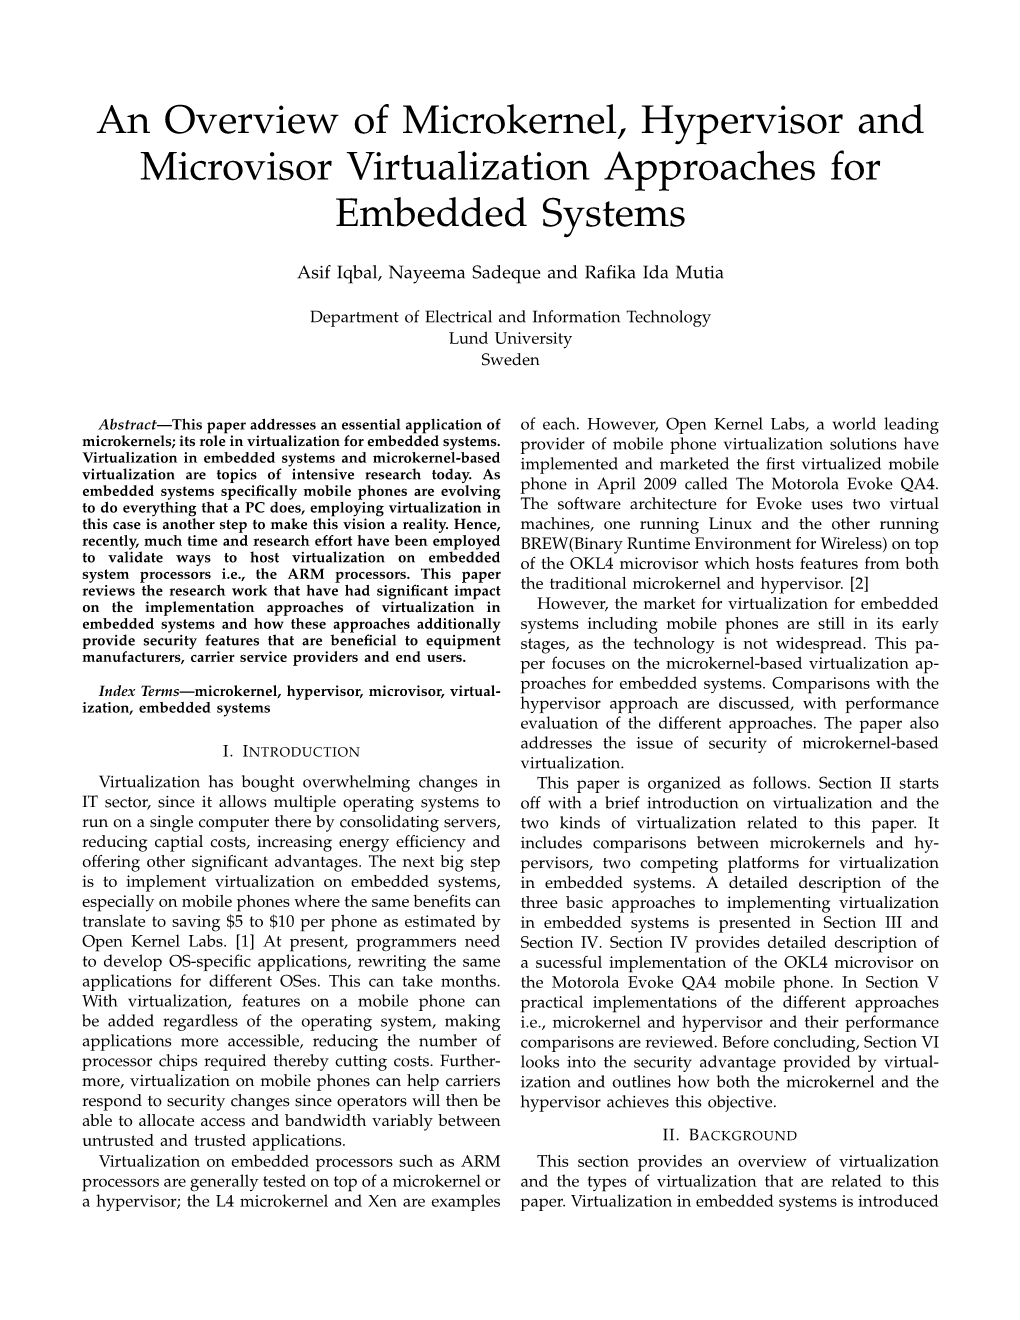 An Overview of Microkernel, Hypervisor and Microvisor Virtualization Approaches for Embedded Systems